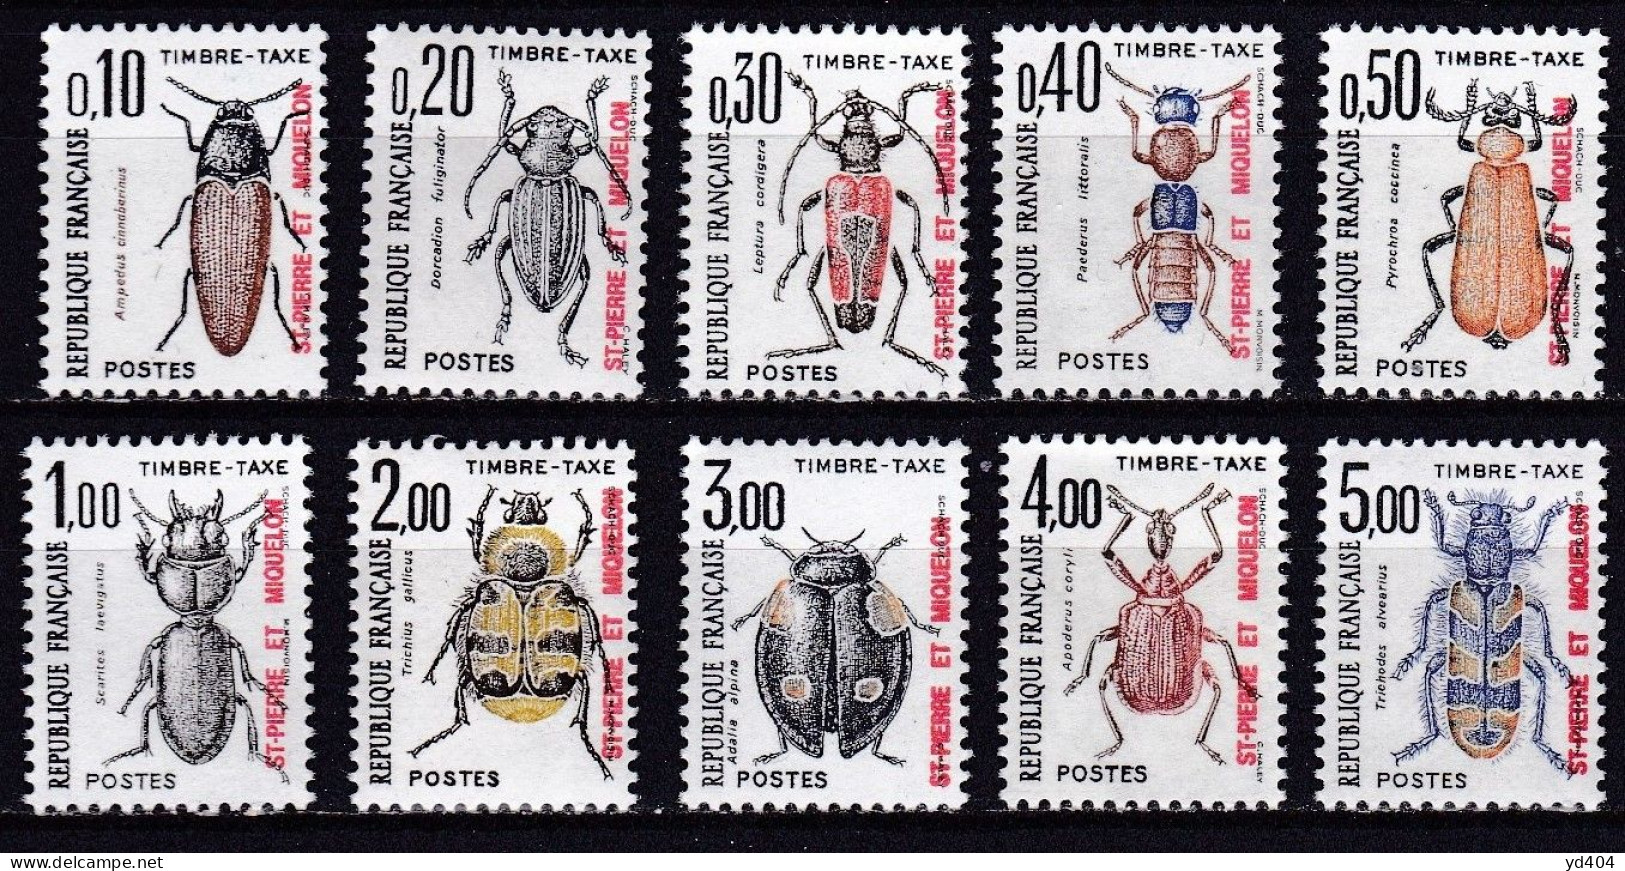 PM-660 – ST PIERRE & MIQUELON – POSTAGE DUE - 1986 – INSECTS – SG # D569/78 MNH 26,50 € - Postage Due